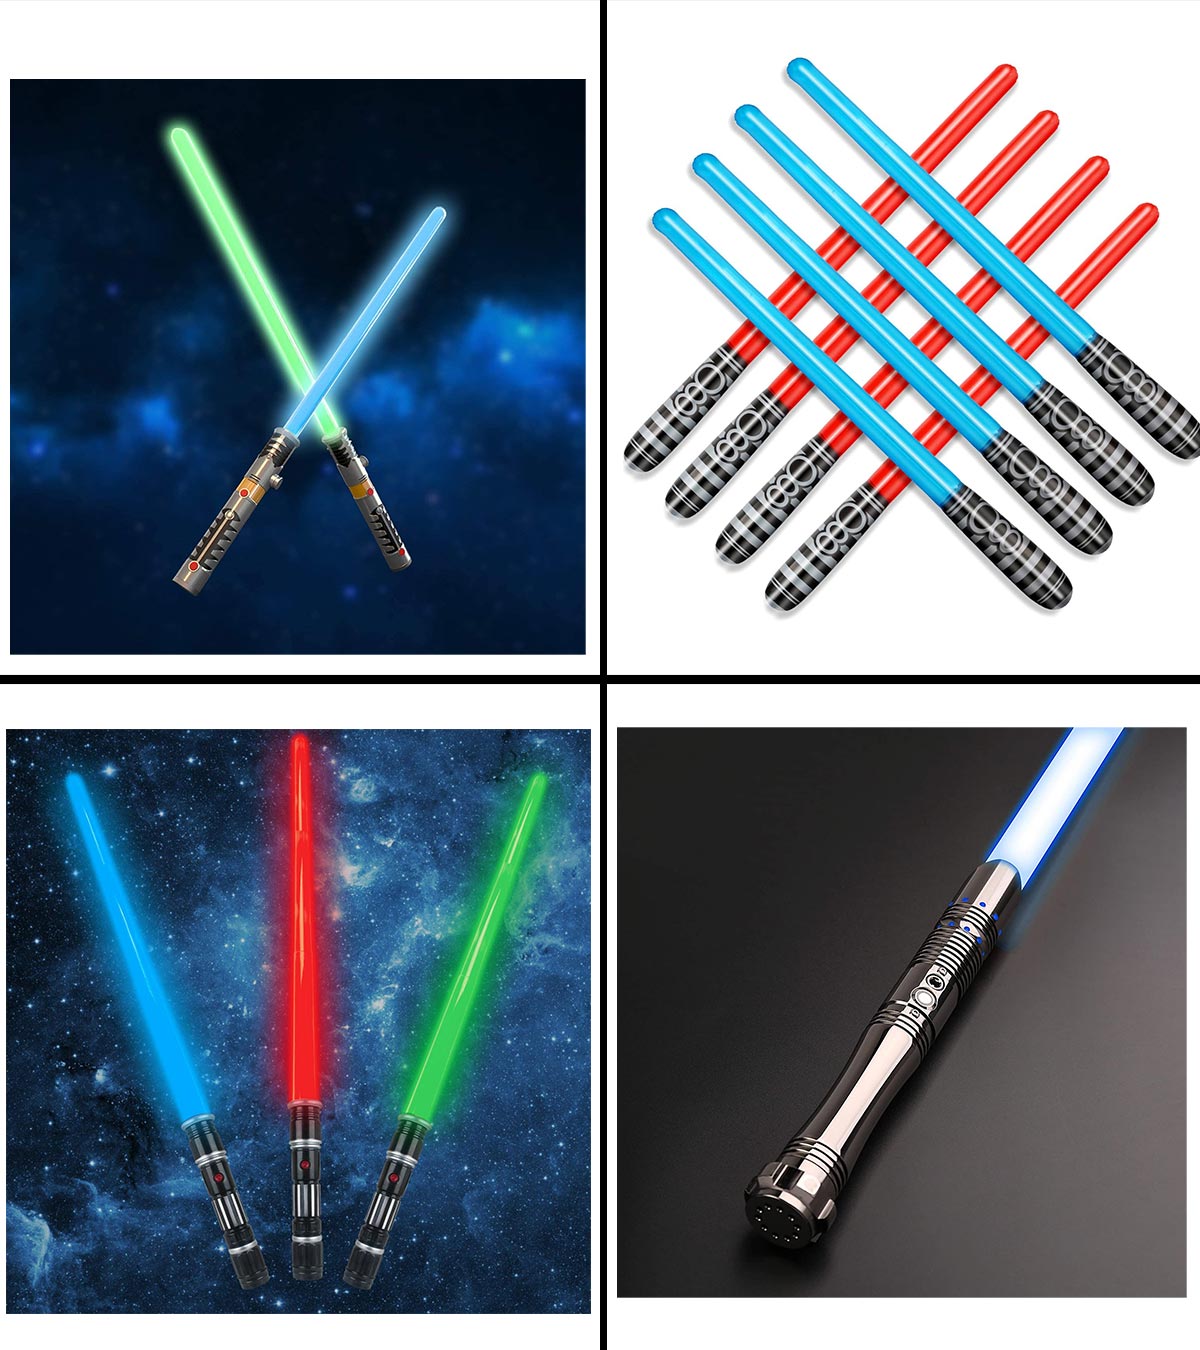 15 Best Toy Lightsabers For Kids To Have Imaginative Play In 2023